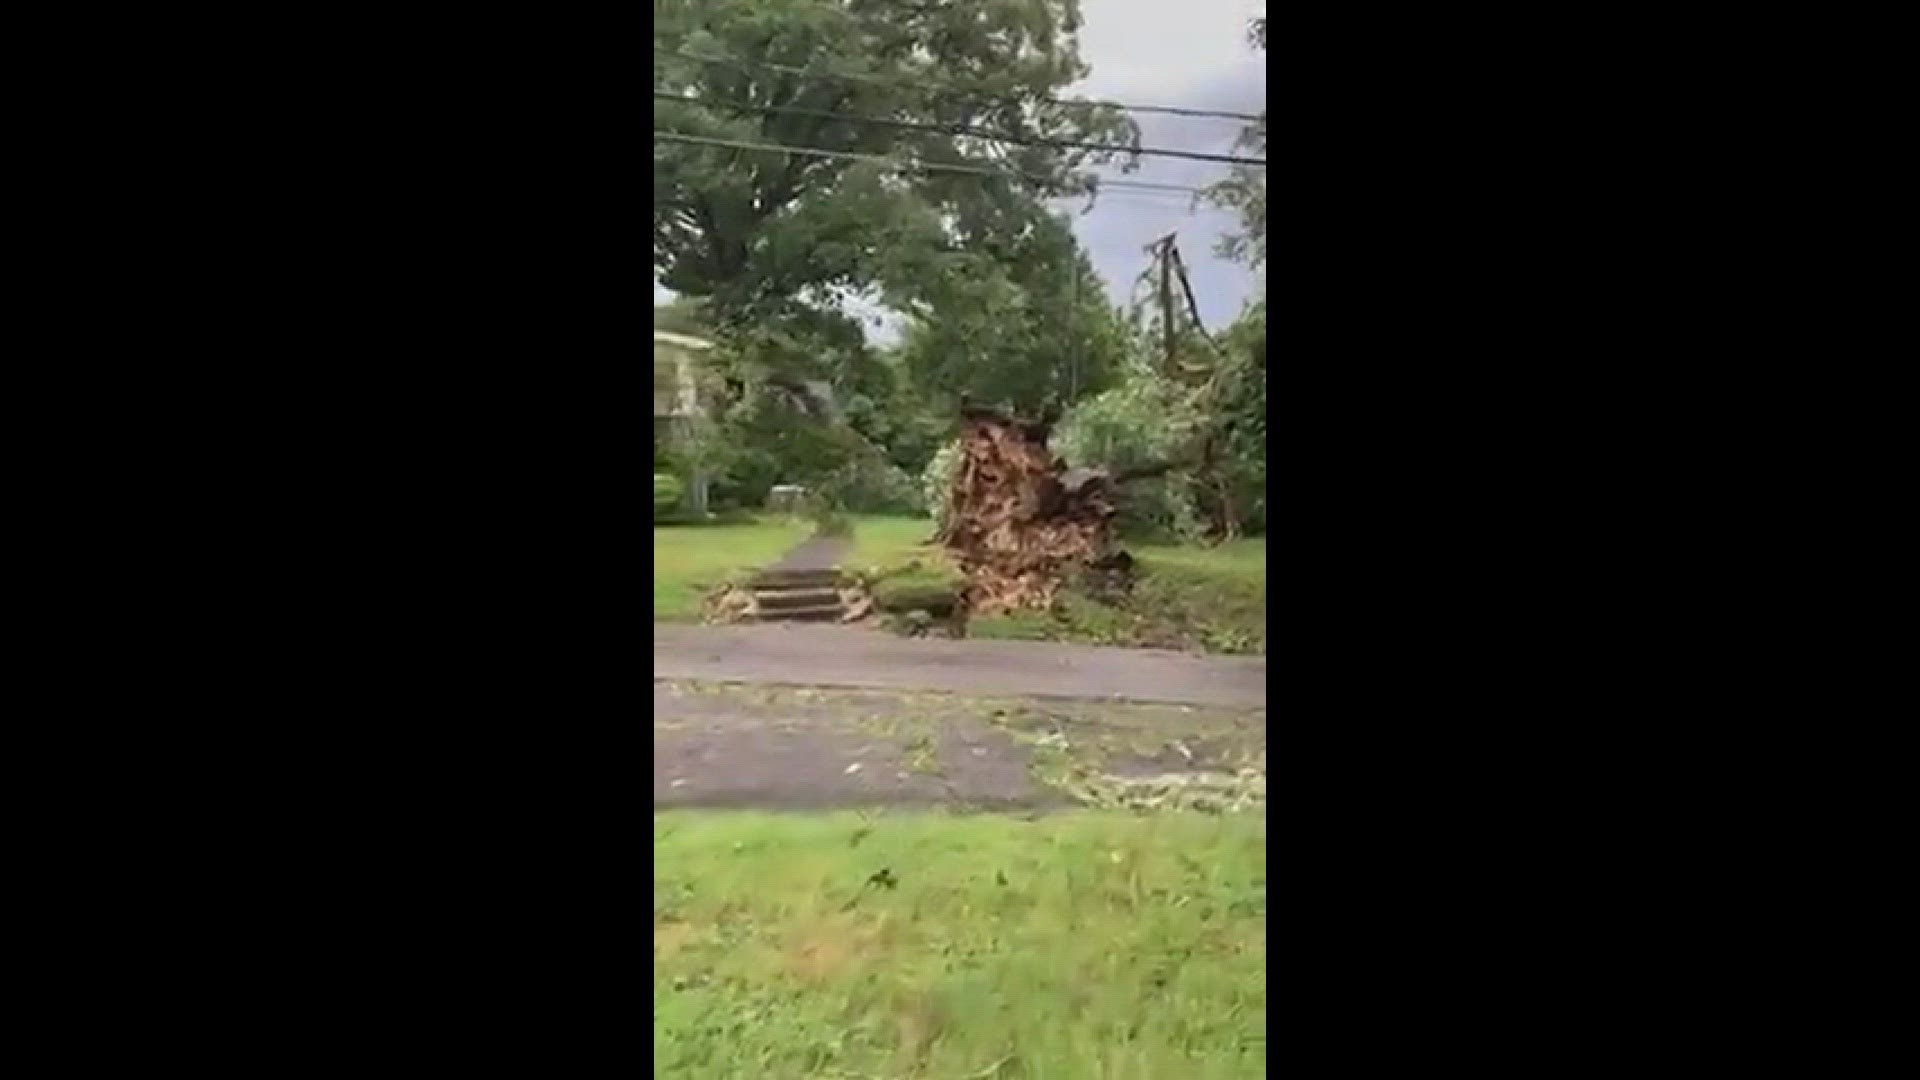 tree uprooted in north knox
Credit: Katie C.